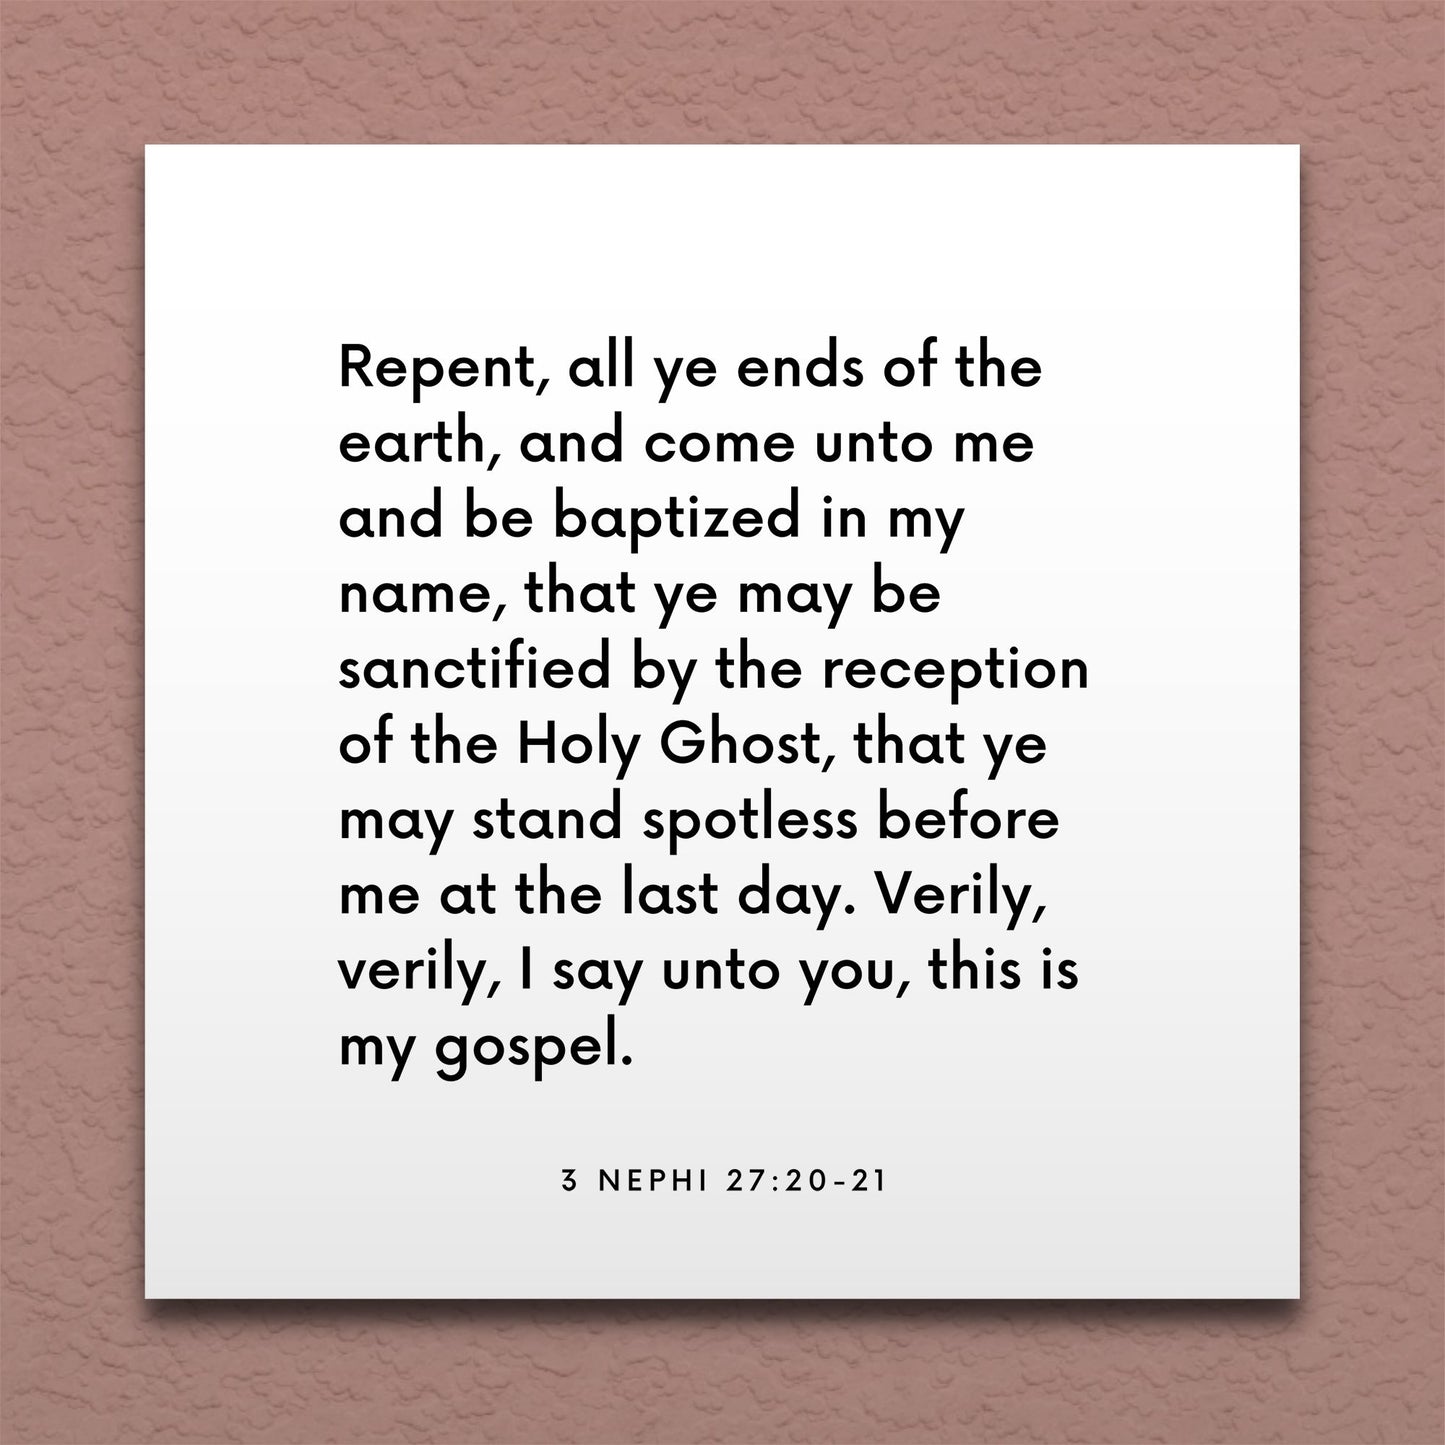 Wall-mounted scripture tile for 3 Nephi 27:20-21 - "Repent, all ye ends of the earth, and come unto me"